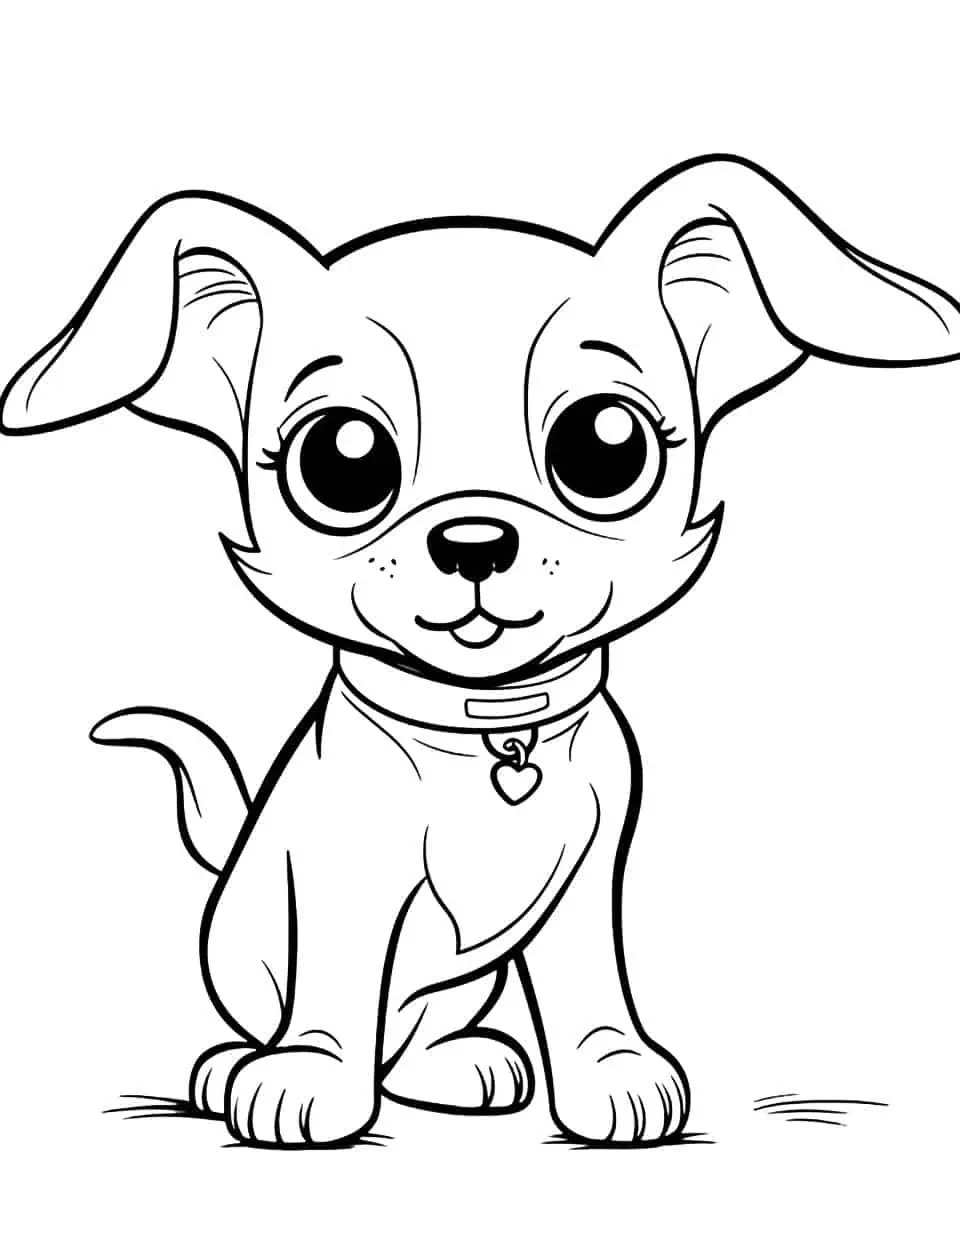 Kawaii Chihuahua Coloring Page - A coloring page featuring a super cute, kawaii style Chihuahua with big eyes.